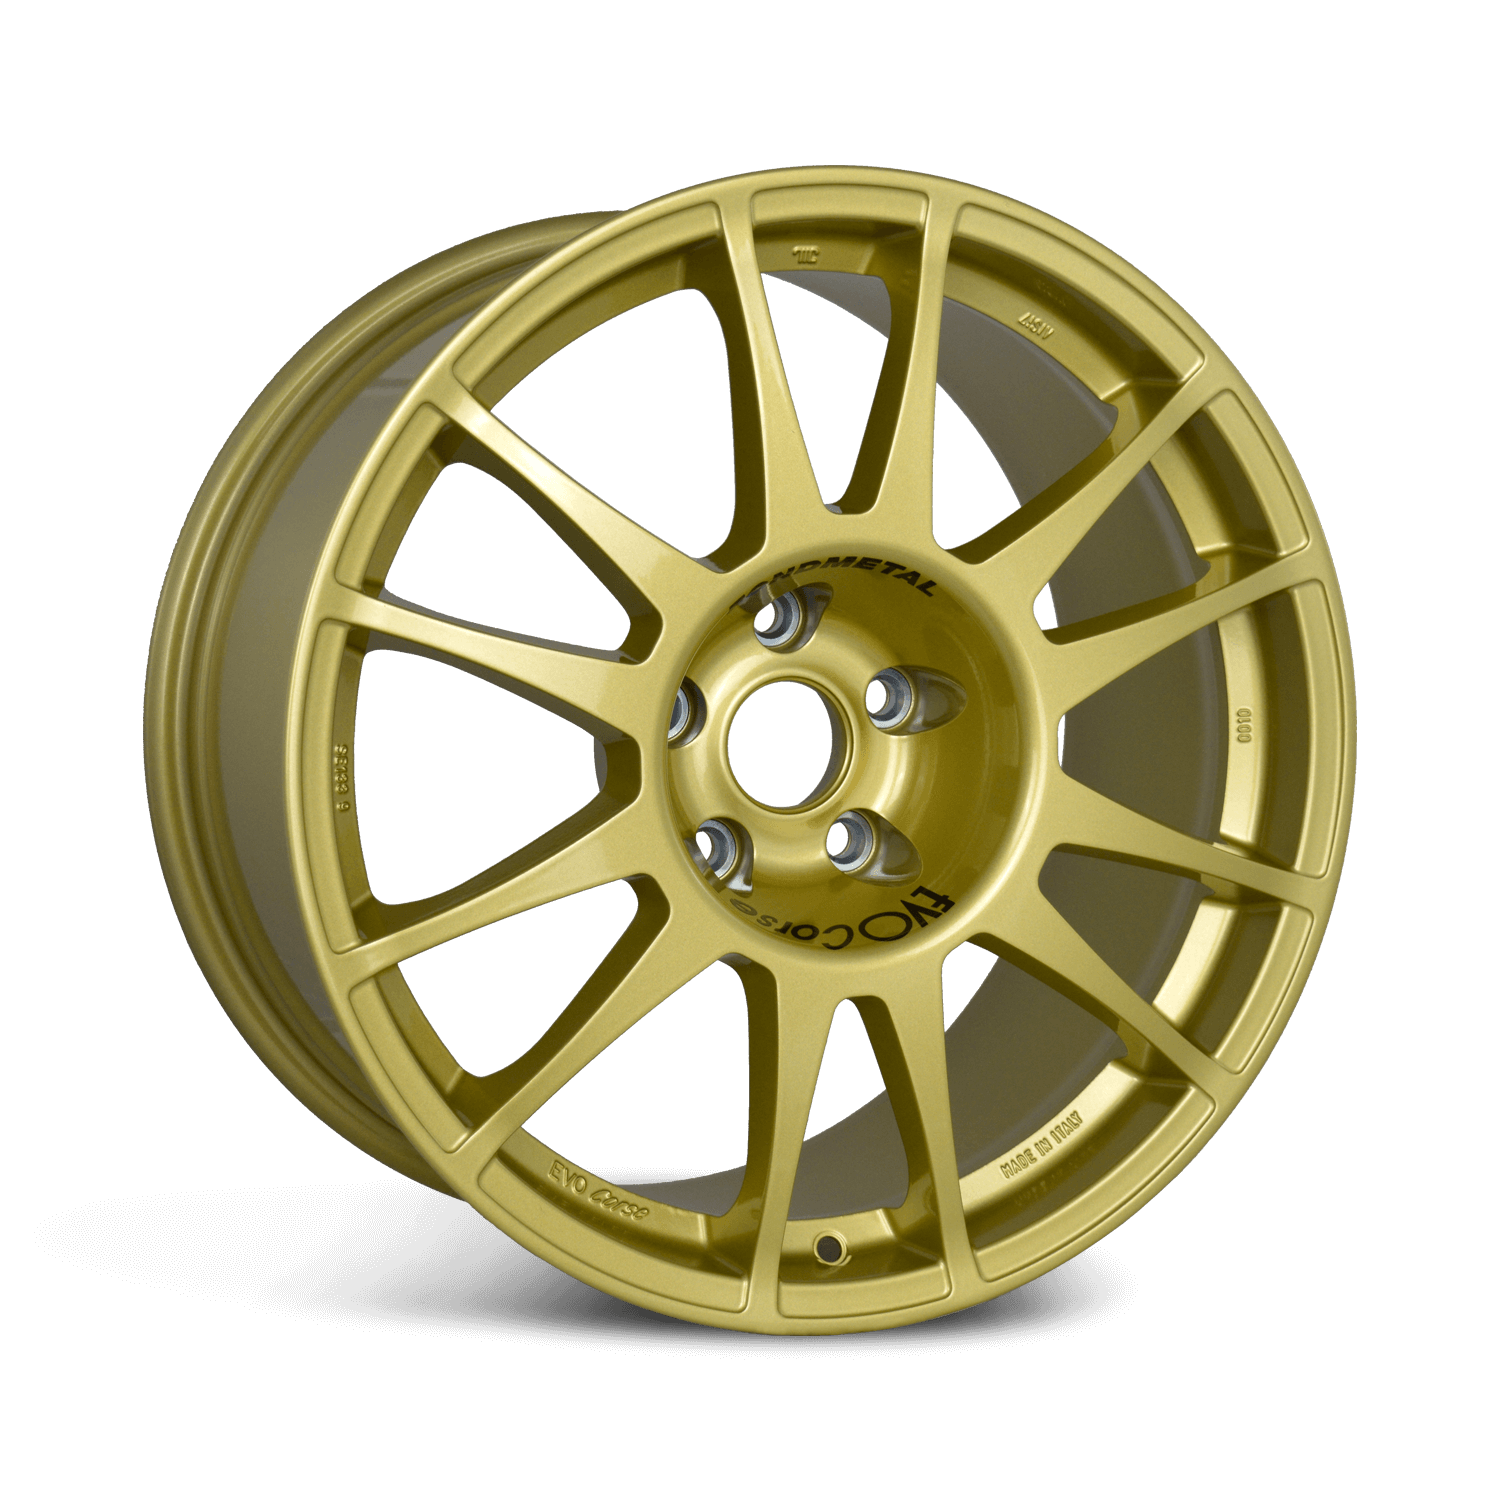 Front view of a Sanremo Corse 18-inch gold wheel with a 12-spoke design against a white background 